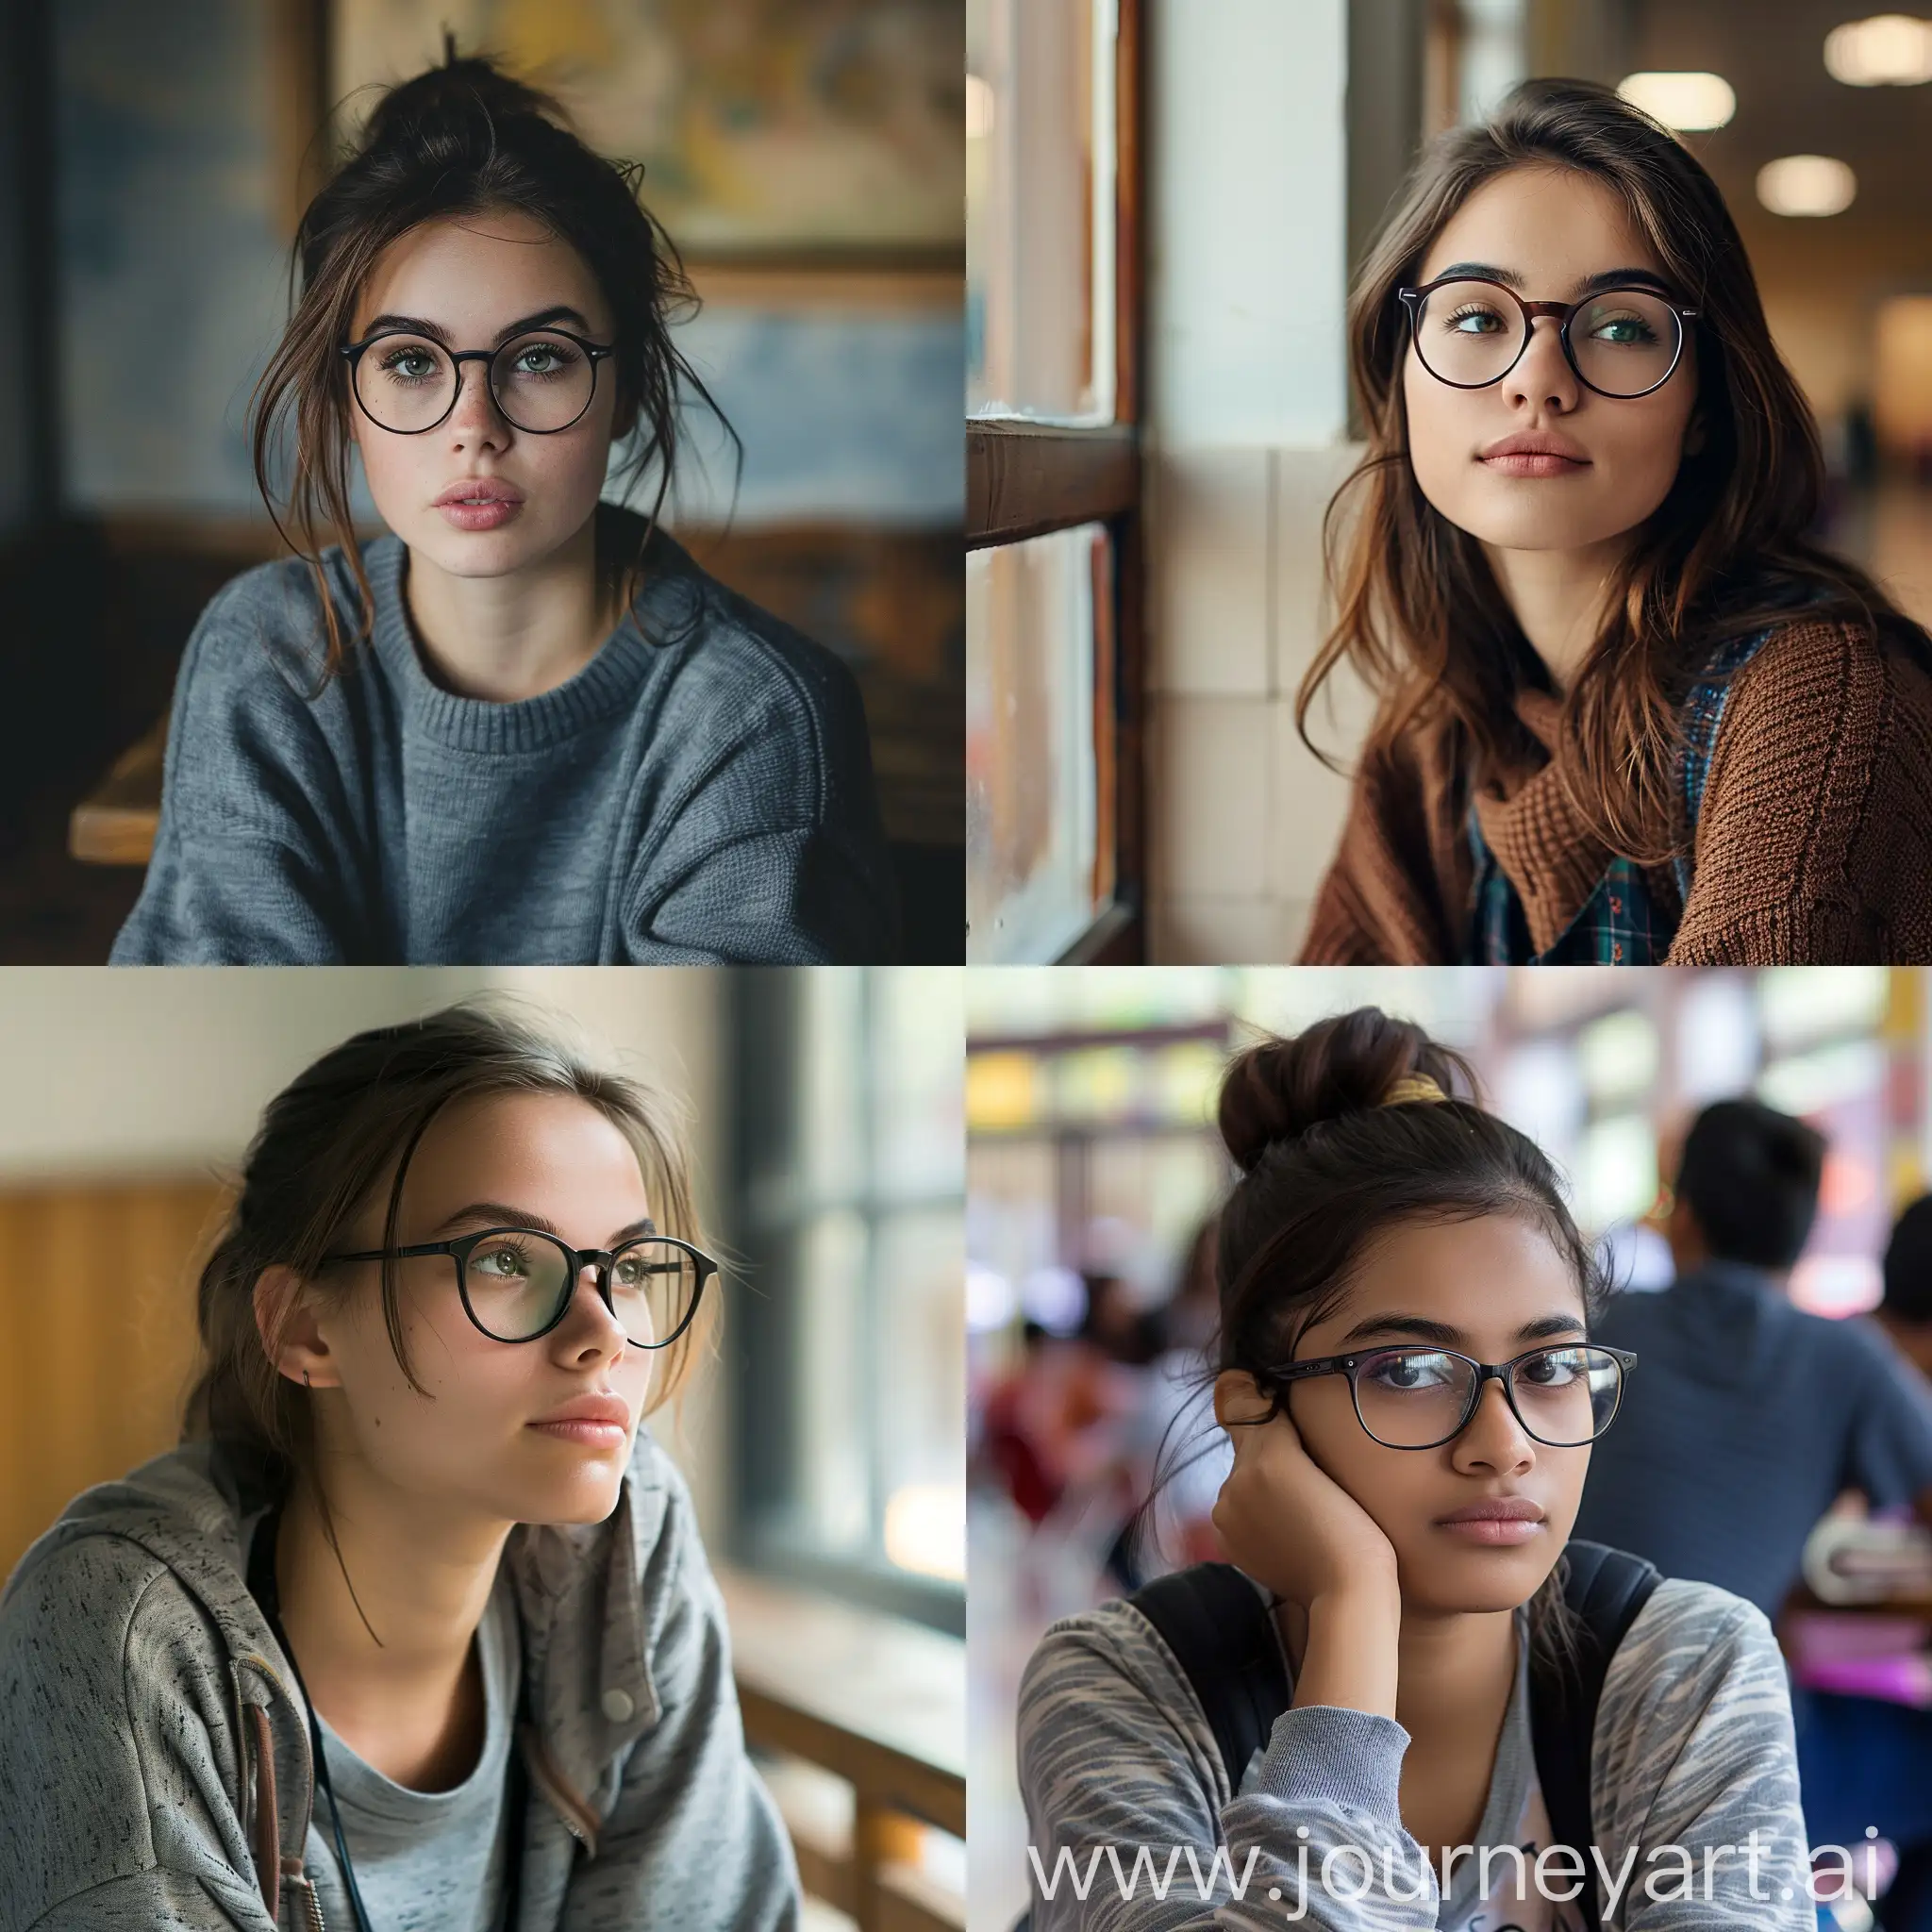 Young-Female-College-Student-with-Glasses-Studying-Quietly